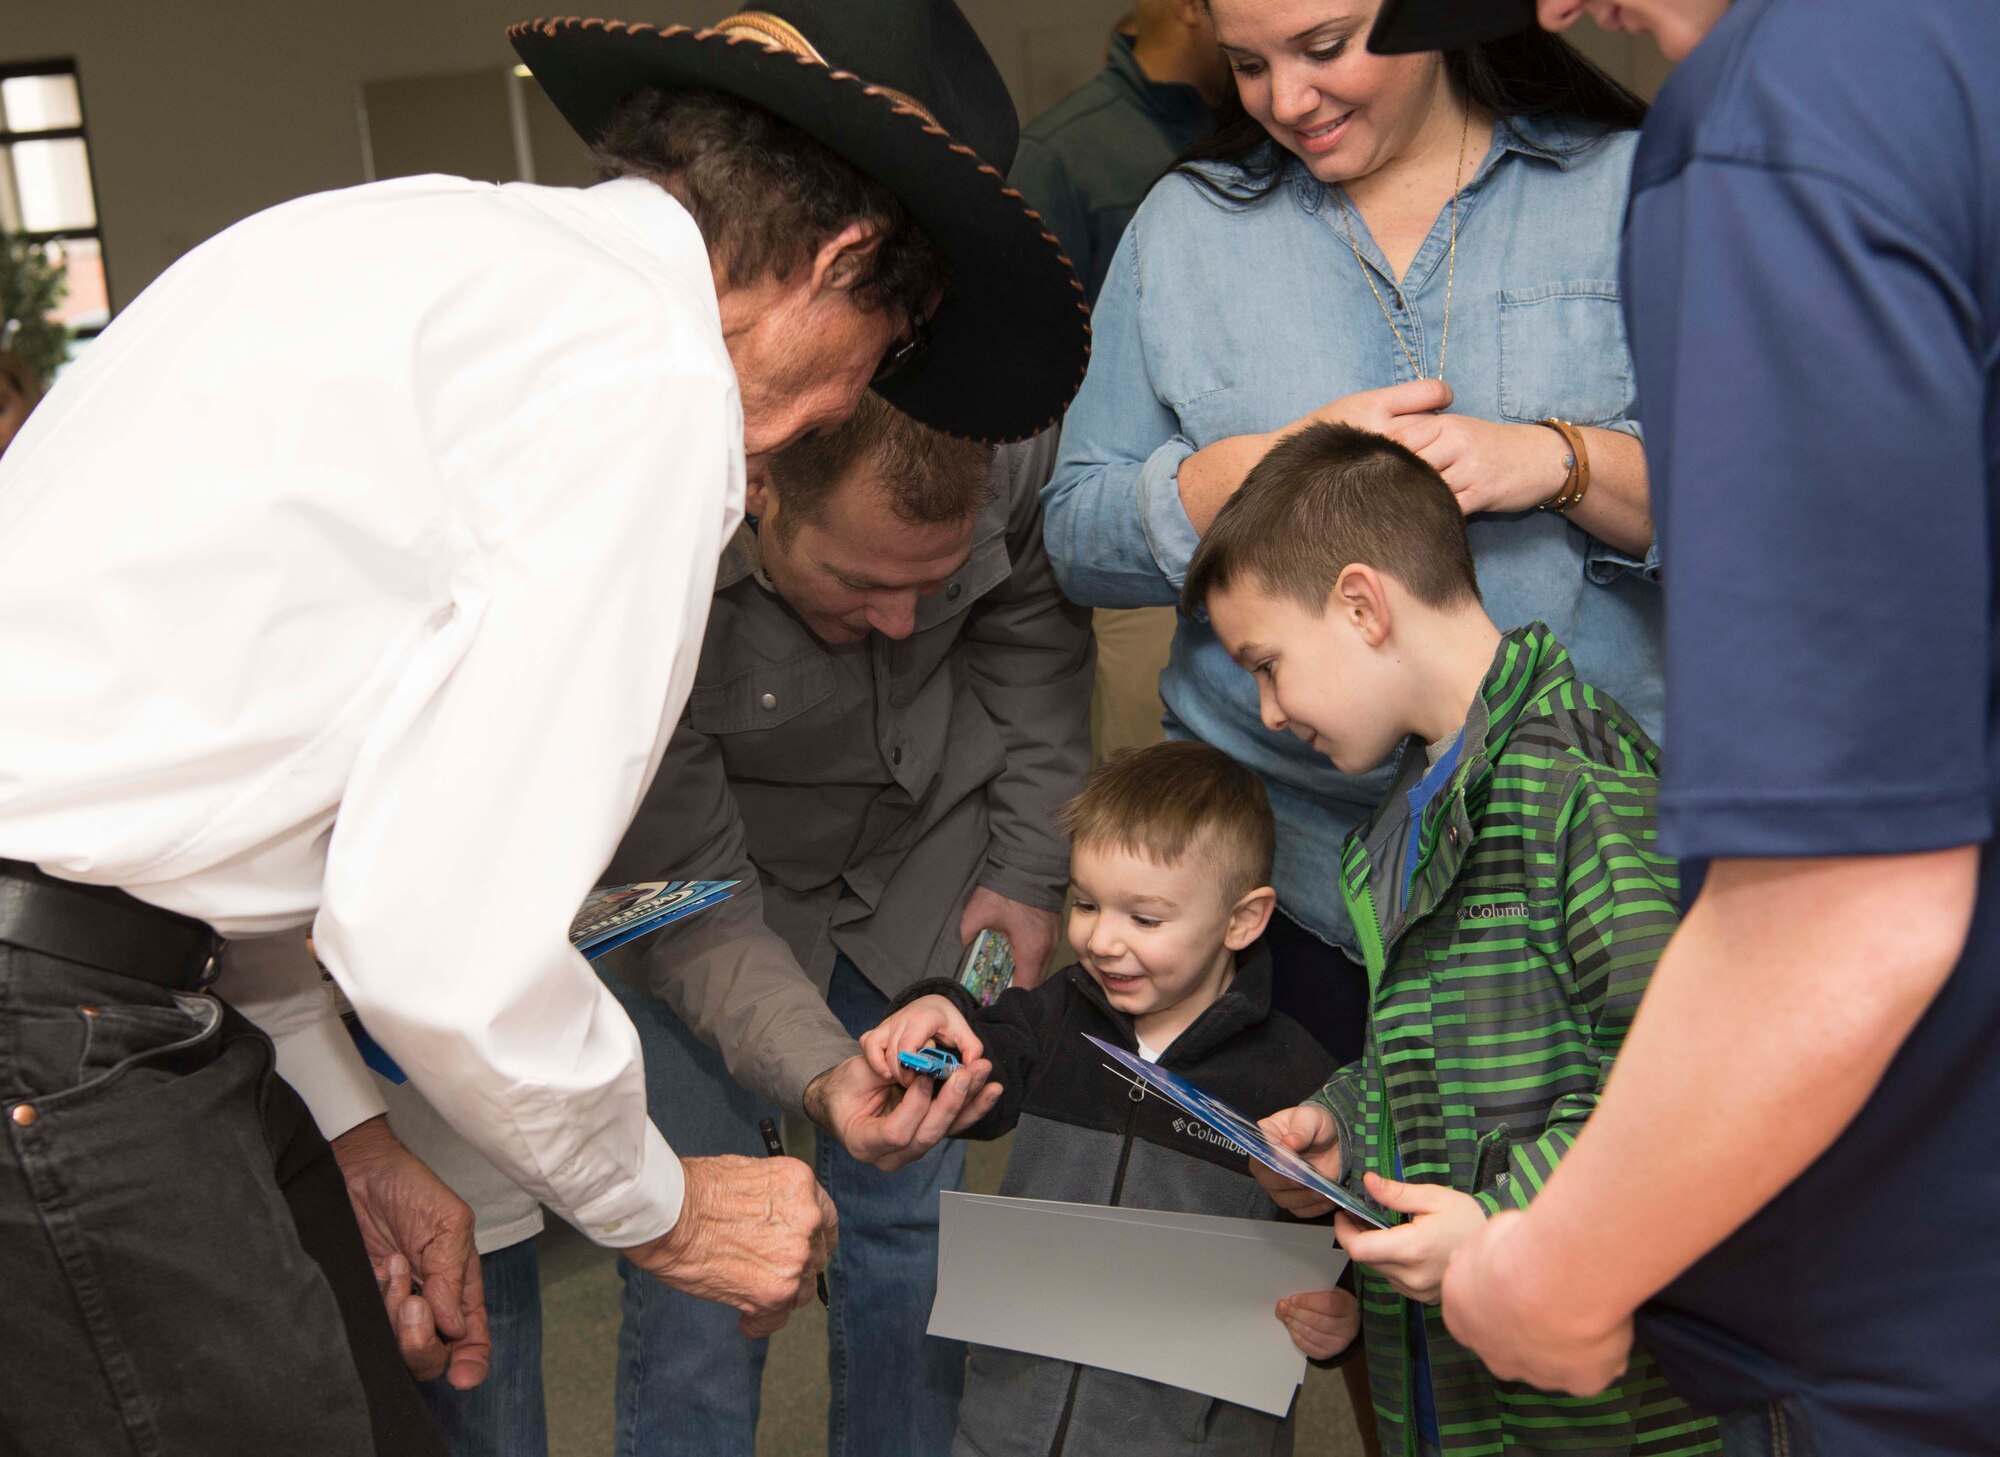 A child receives a toy car which Richard Petty, Nascar legend, signed on Ramstein Air Base, Germany, Jan. 27, 2018. Petty signed memorabilia, took pictures with new Air Force recruits and their families, and participated in a question and answer session in part because the Air Force Recruiting Service sponsors Petty and Richard Petty Motor Sports, which displays the Air Force symbol on car Nascar racecar number 43. (U.S. Air Force photo by Senior Airman Elizabeth Baker)